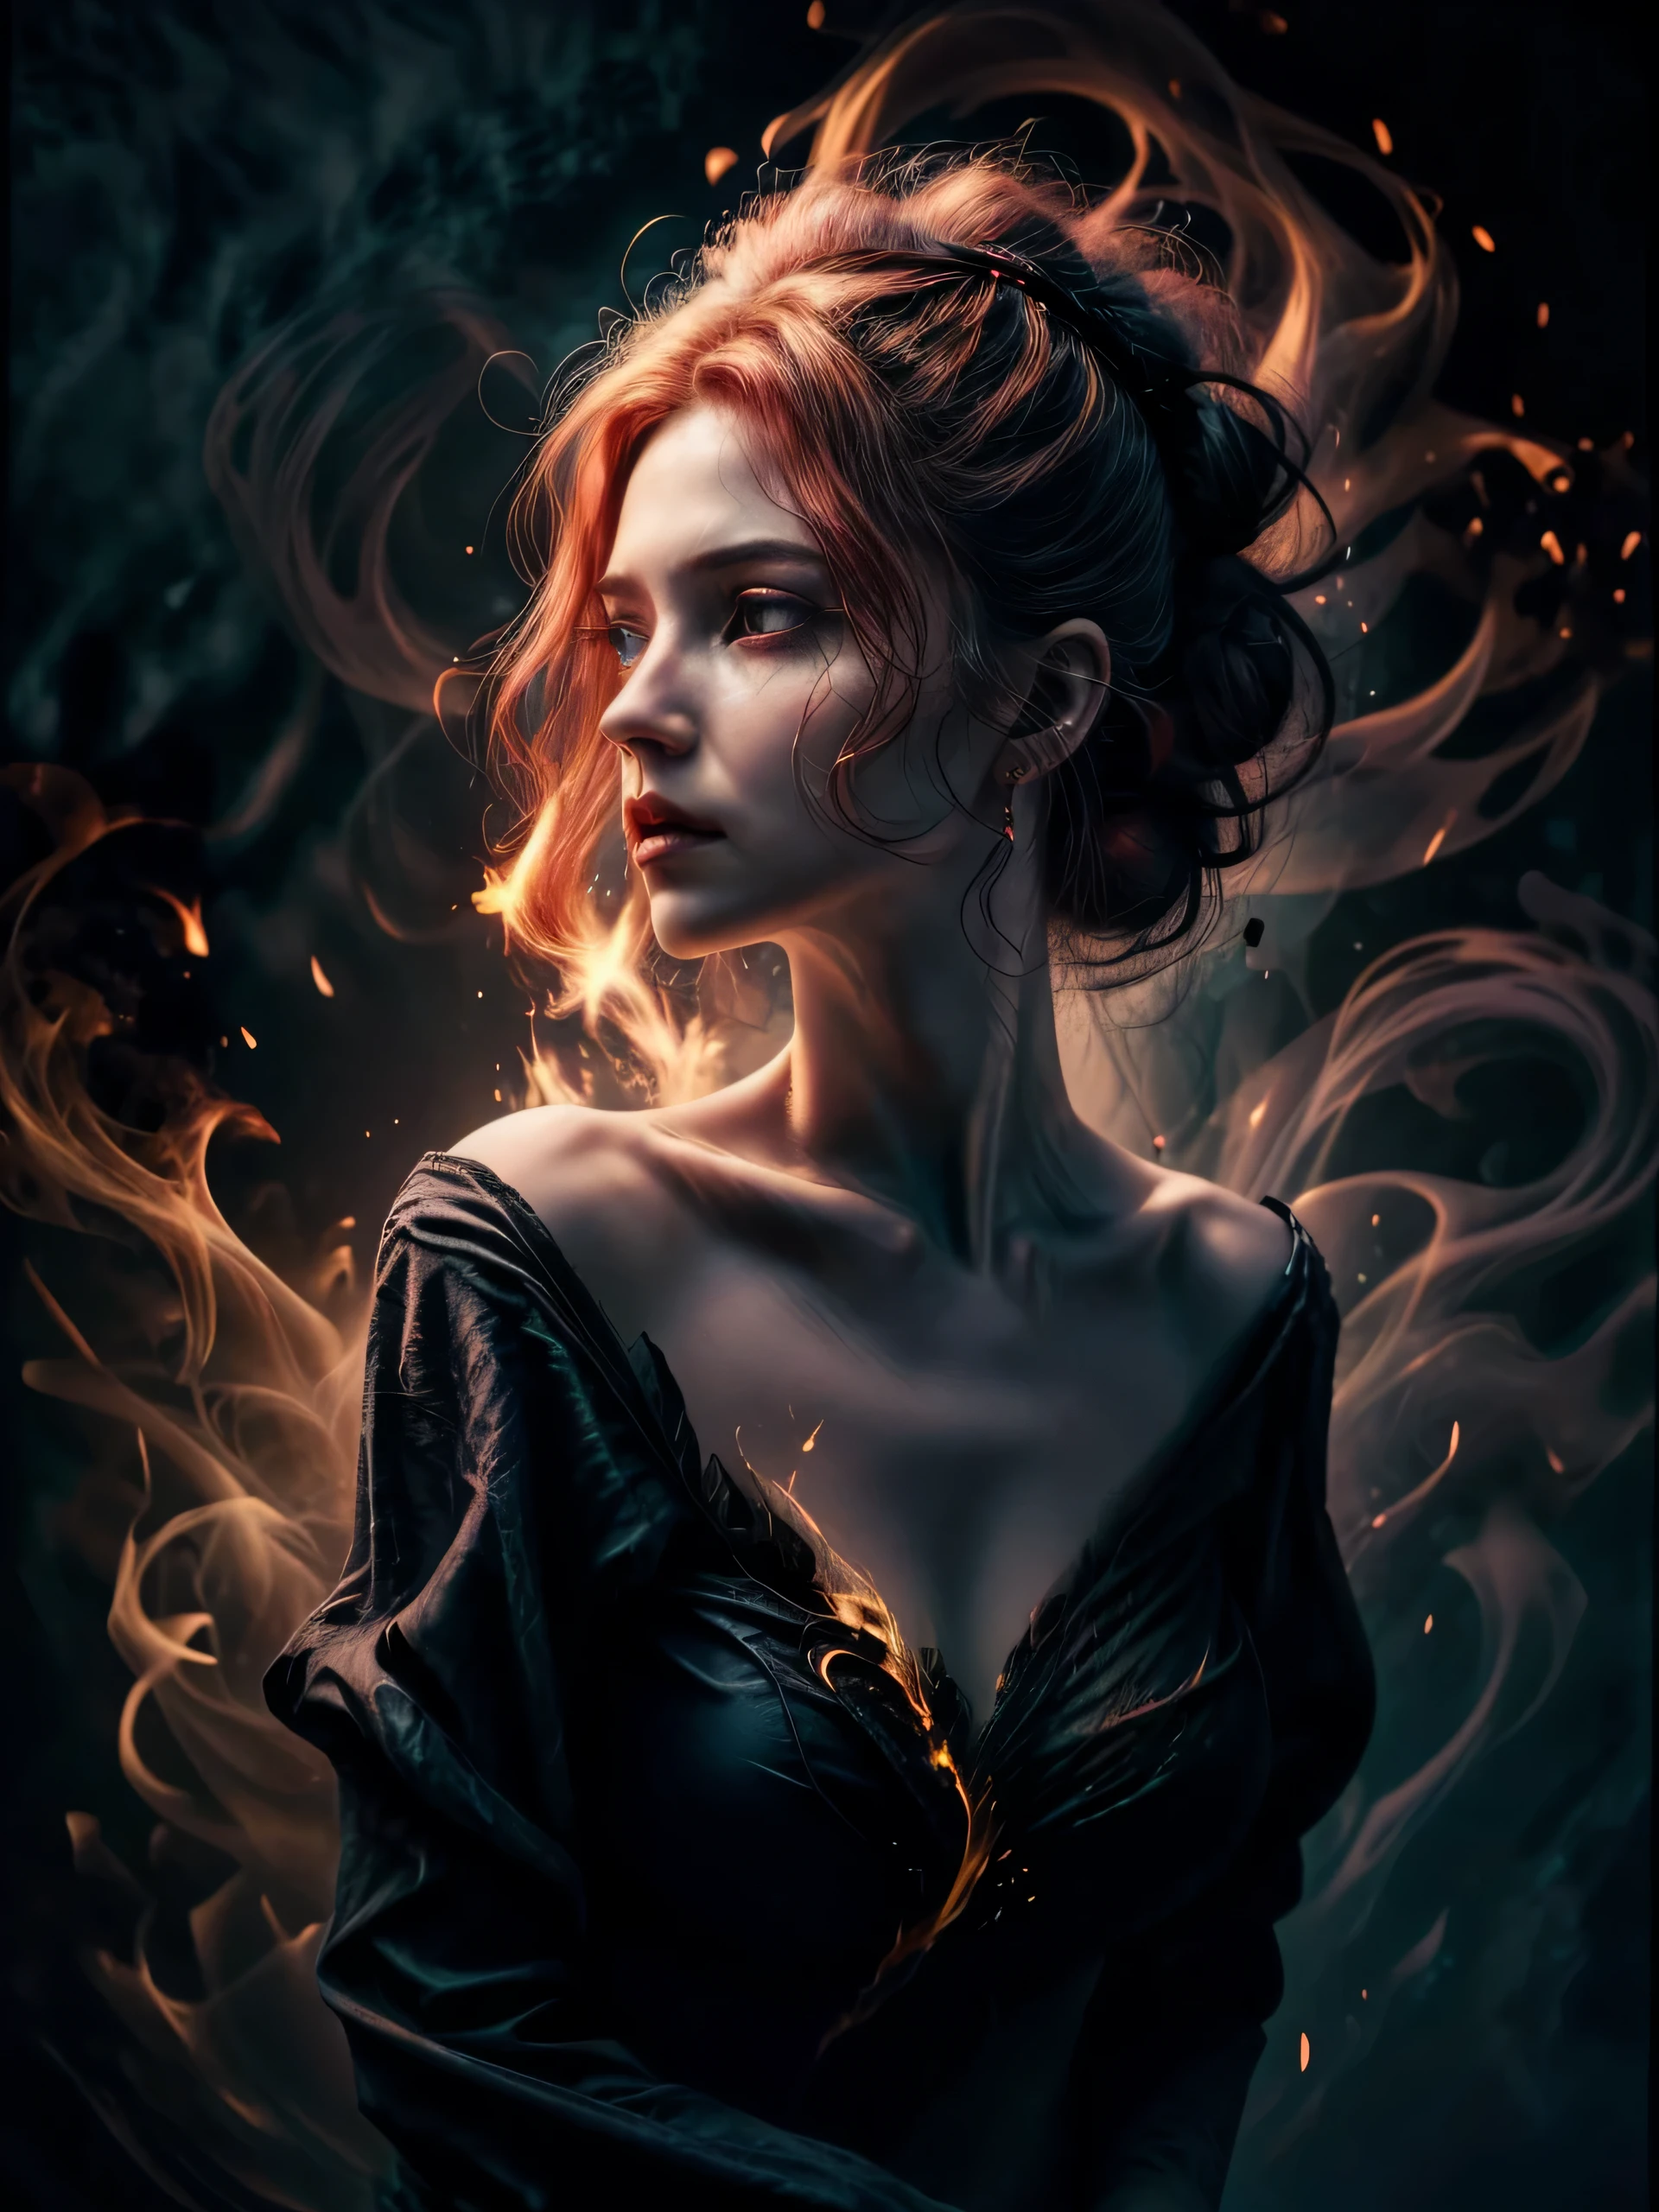 (Masterpiece, best quality, highres:1.3), from side, photorealistic, close-up, 1 goddess of flame, queen of demonic fire, from fantasy novel, feminine appearance, cleavage, detailed hair strands, delicate face, glowing red eyes, furious gaze, fully dressed in elegant gothic dress with fire effect, fire diadem, immense fire spell, blazing flame on hand, fire storm, flame spark, fire realm, ((surrealistic detail))